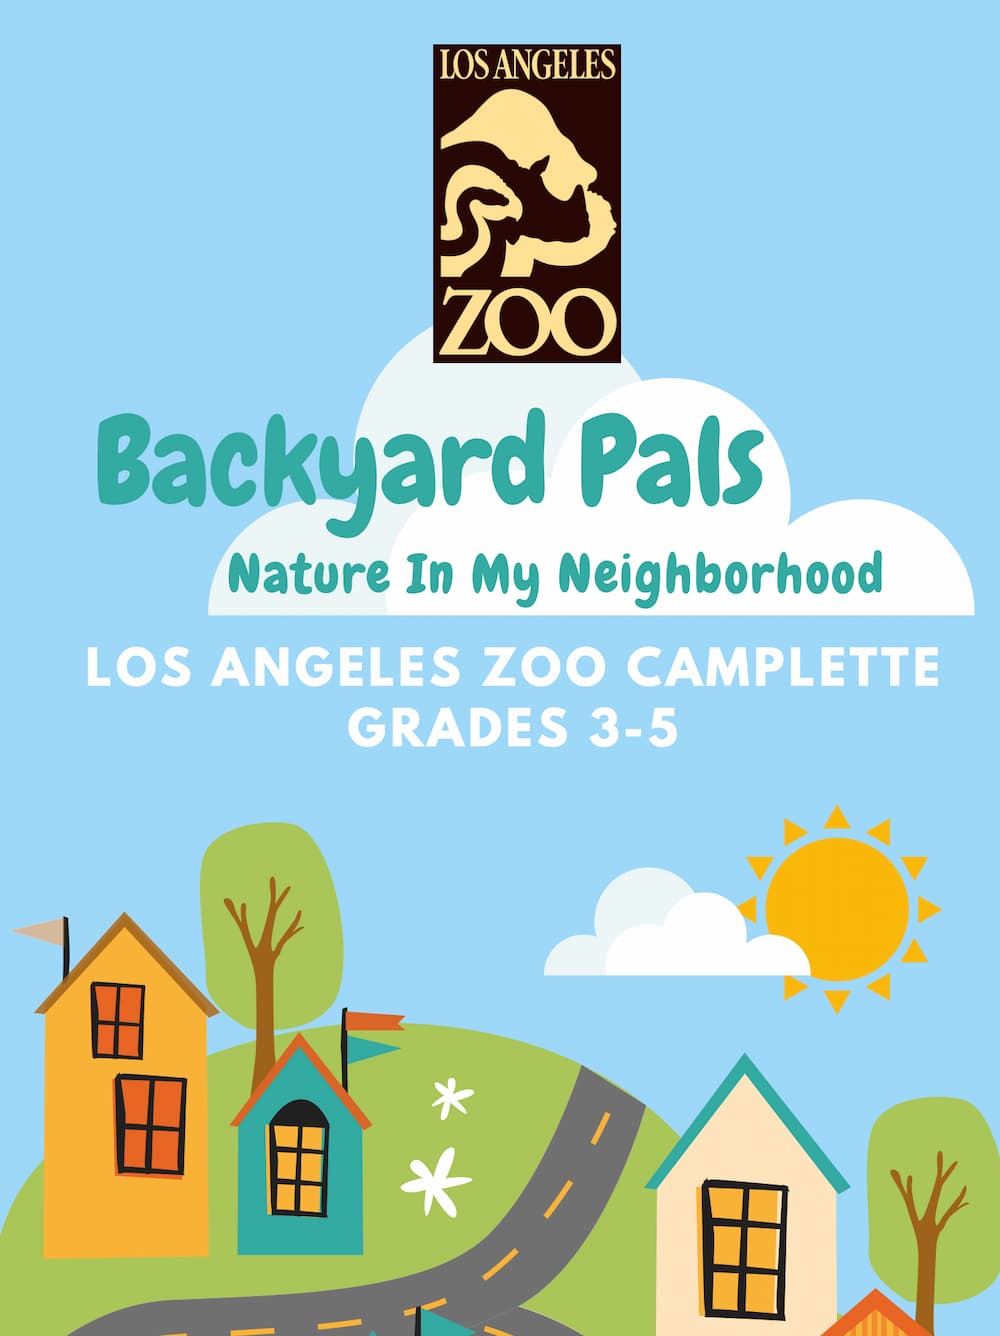 Backyard Pals: Nature in My Neighborhood cover with a blue sky, a sun, some trees, and homes